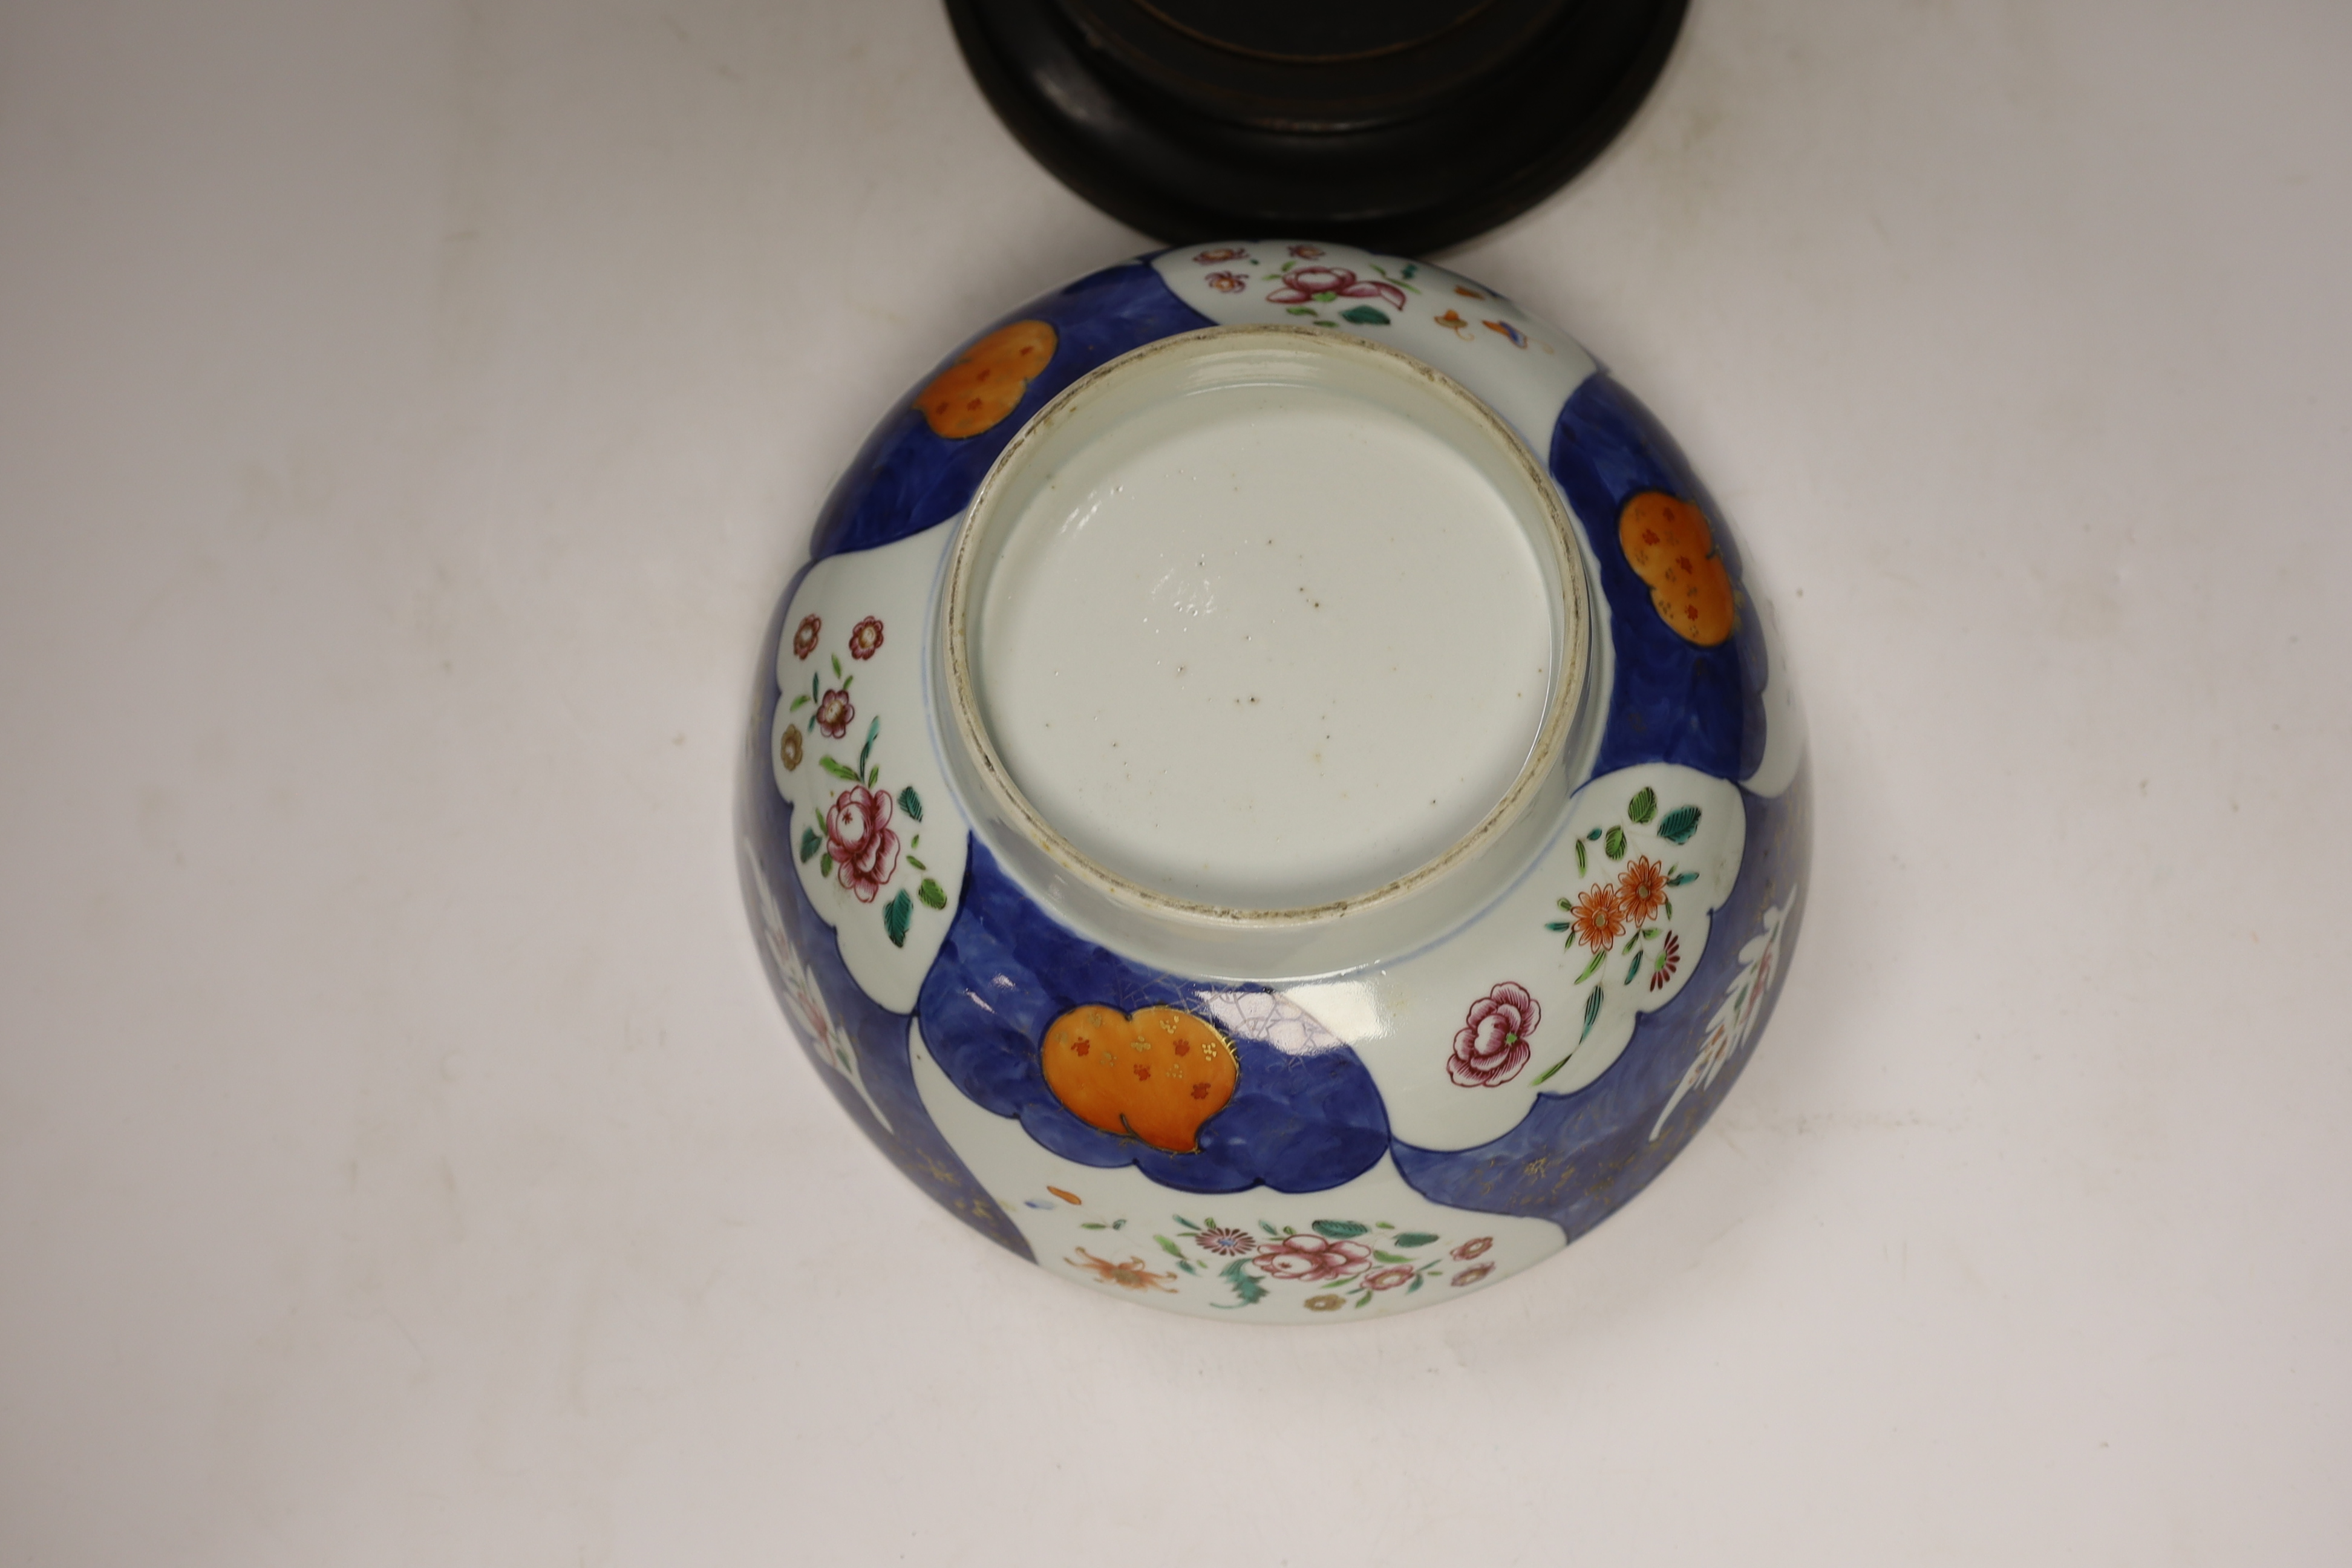 A large 18th century Chinese Export porcelain bowl, on associated stand, 28cm diameter